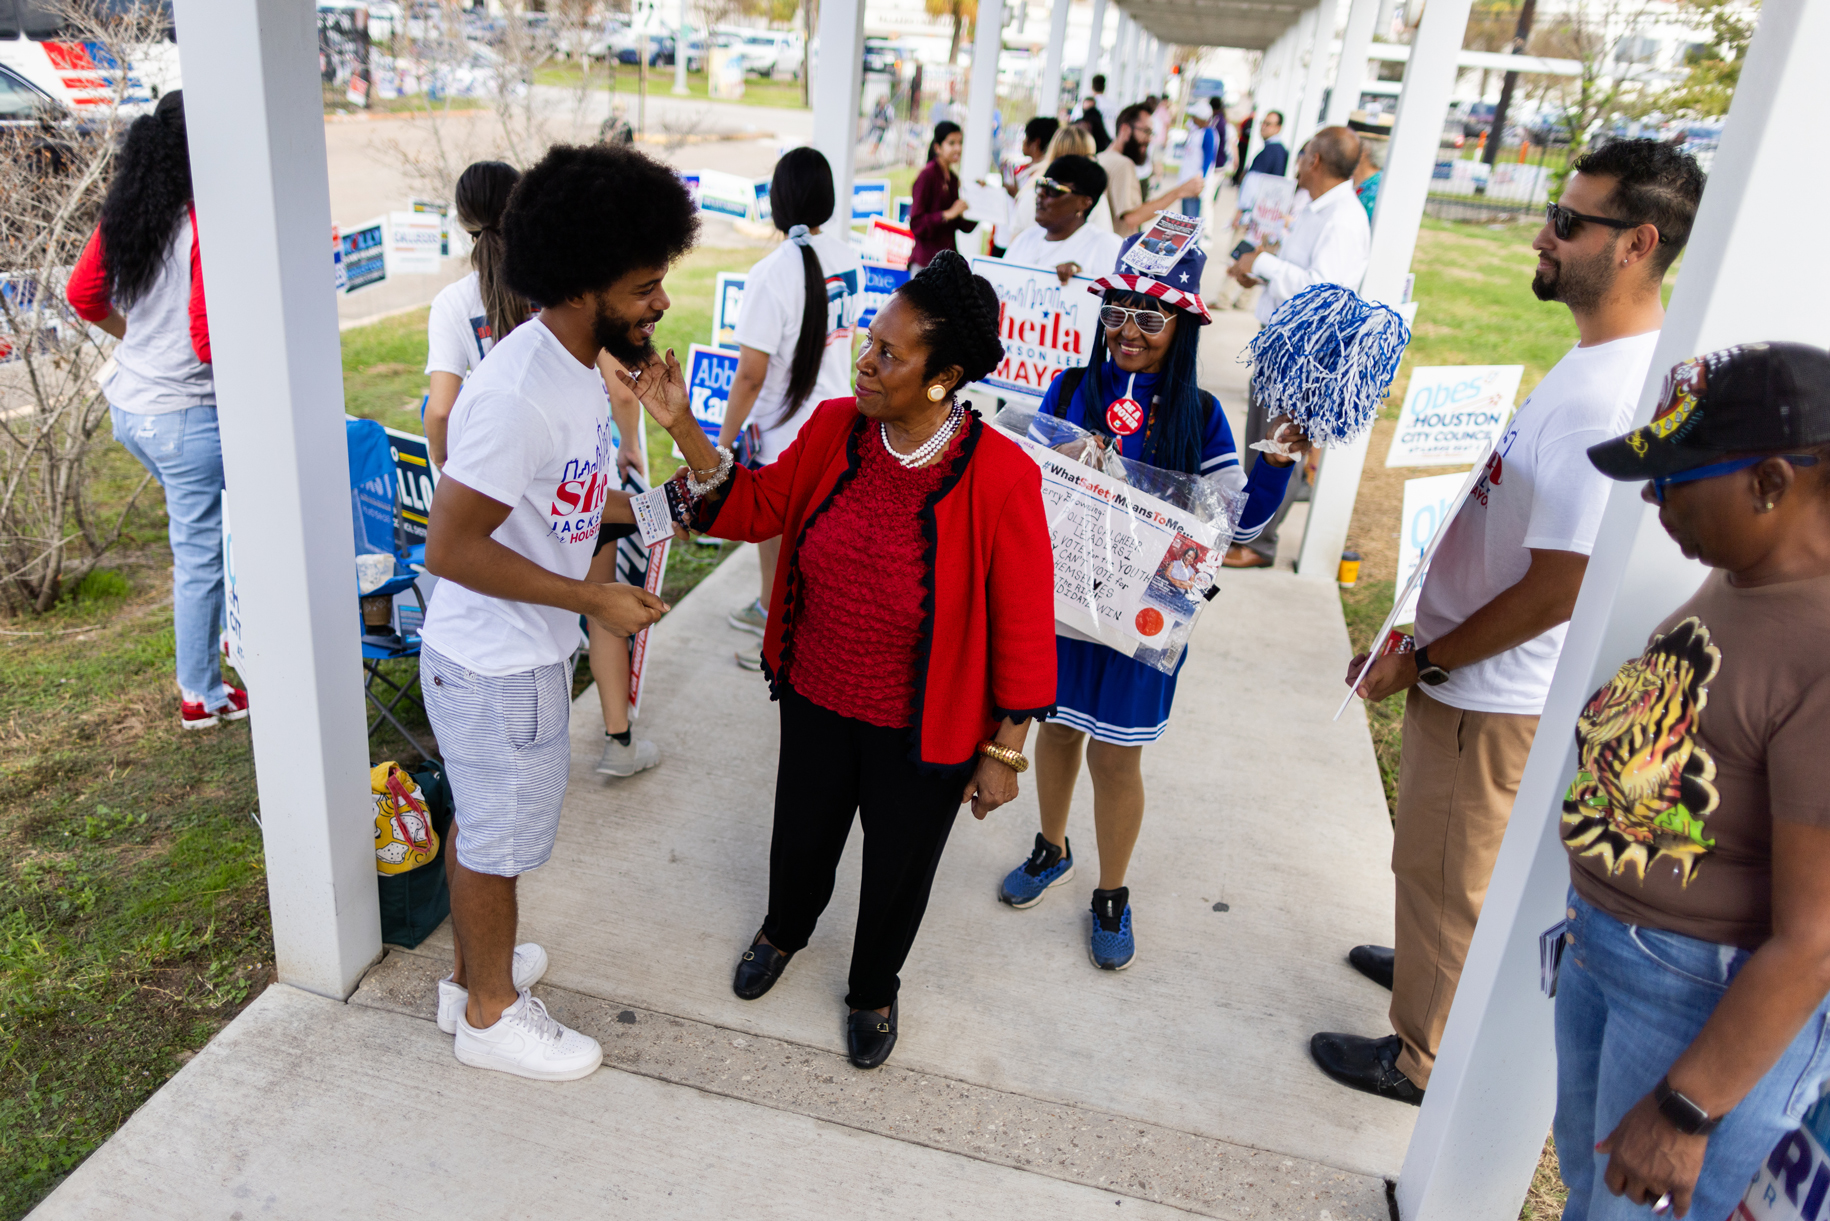 Houston mayoral candidate Congresswoman Sheila Jackson Lee meets with voters and campaign workers at the Houston Metropolitan Multi-Service Center on Election Day, 